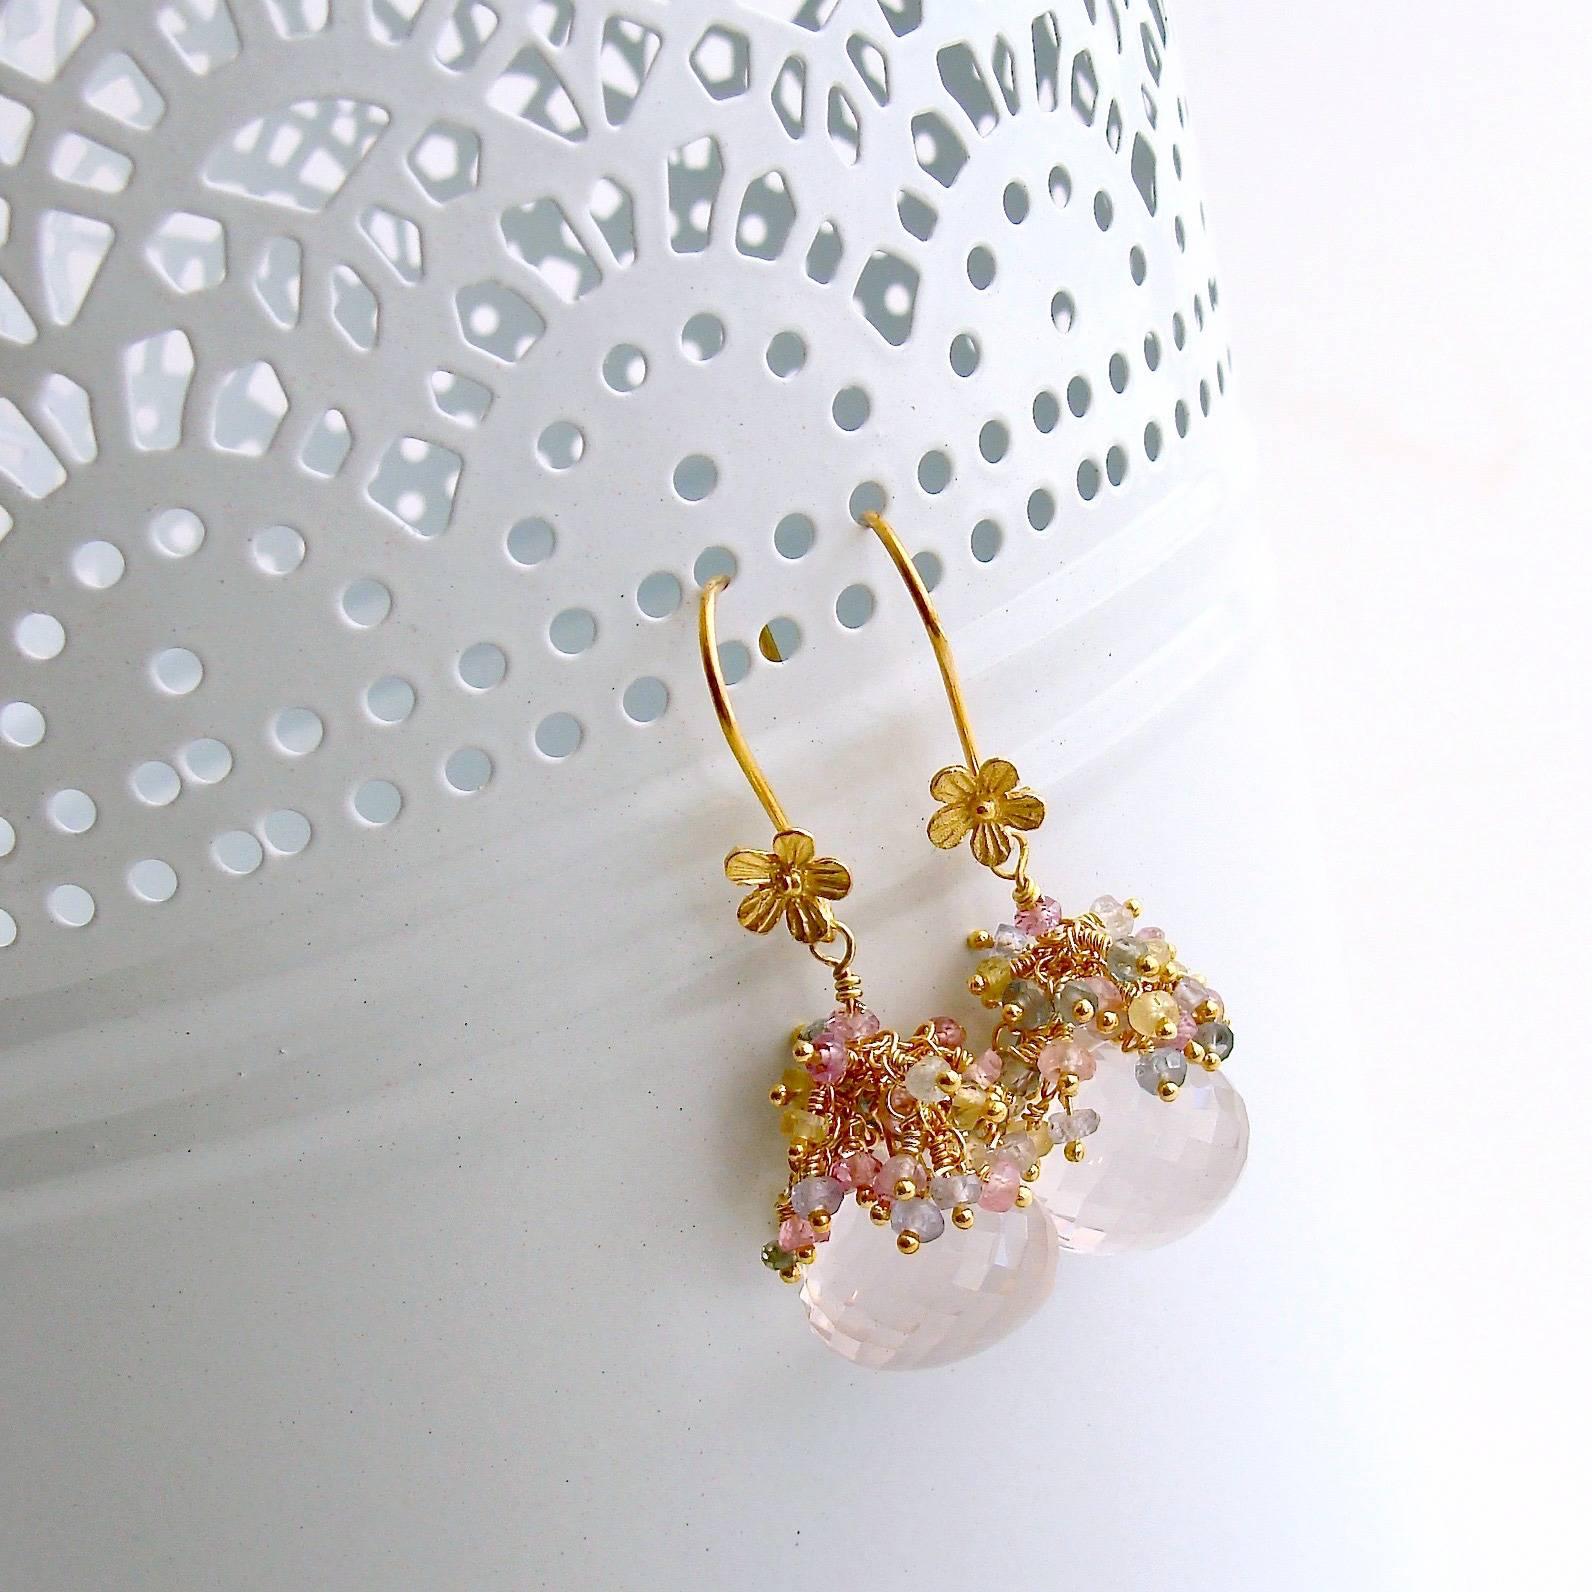 Juliet II Earrings.

Softly colored rose quartz faceted “kisses” have been topped with a cascade of delicate pastel sapphire tendrils creating a pair of romantic fairy tale earrings.  The gold vermeil earrings have been paired with an ear wire